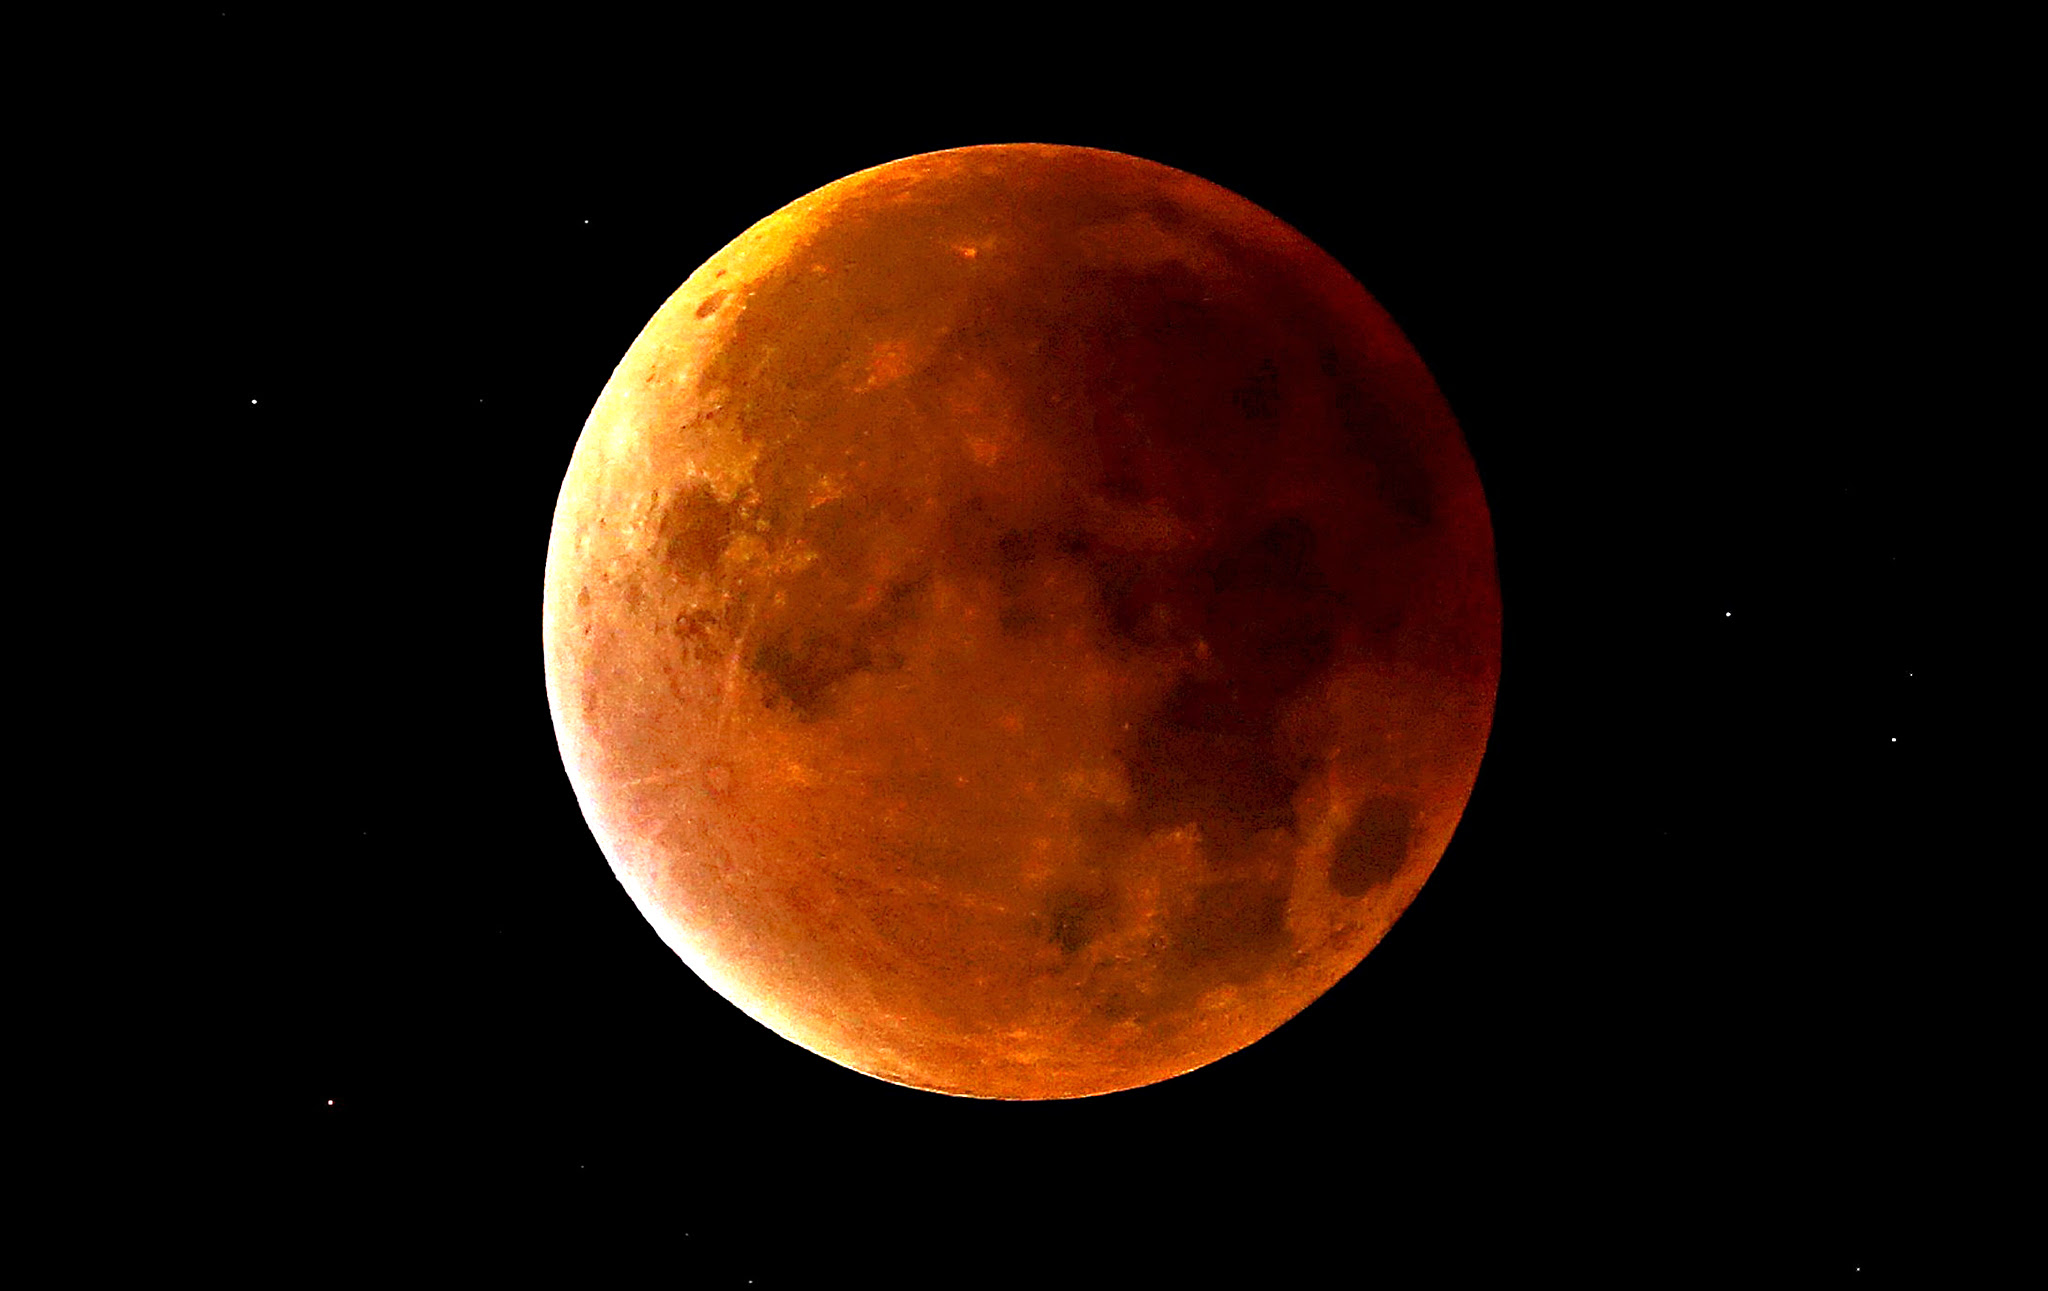 A lunar eclipse coincides with a so-called "supermoon" in Newcastle-under-Lyme, Staffordshire, England. Sky-watchers around the world are in for a treat Sunday night and Monday when the shadow of Earth casts a reddish glow on the moon, the result of rare combination of an eclipse with the closest full moon of the year